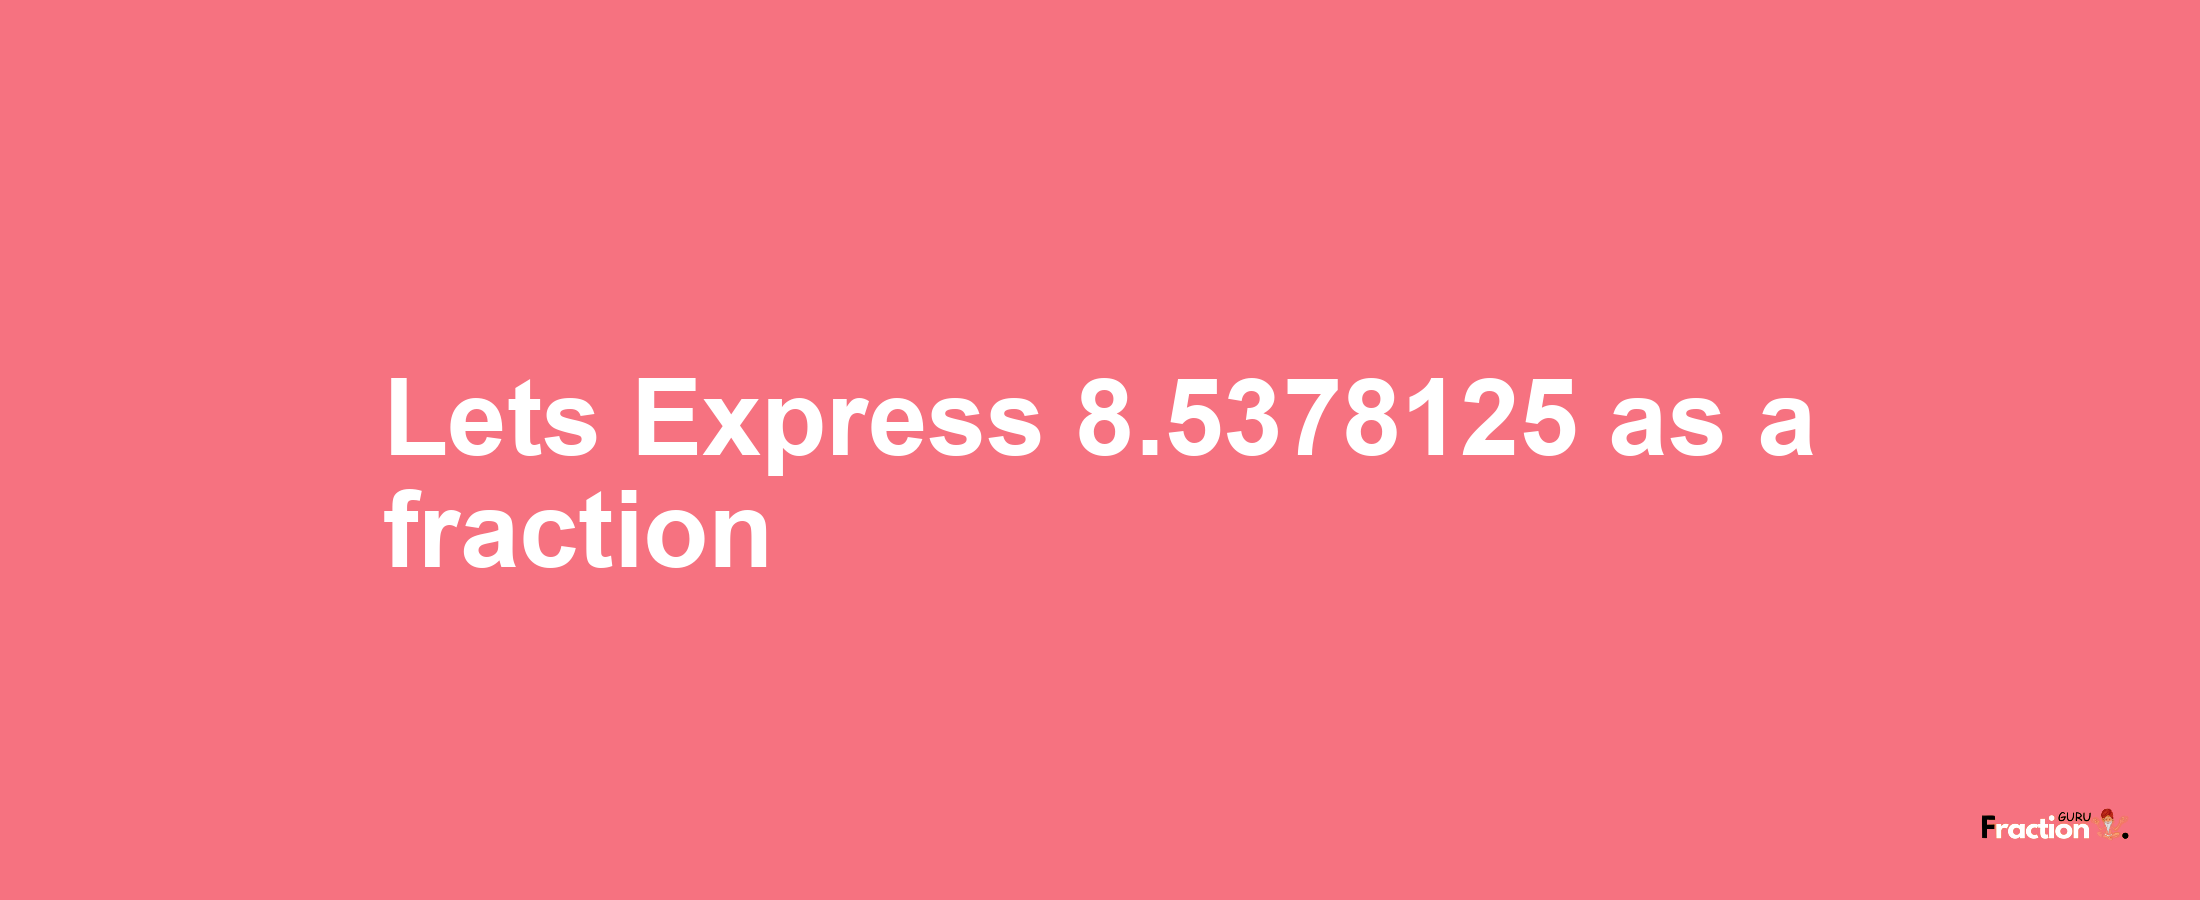 Lets Express 8.5378125 as afraction